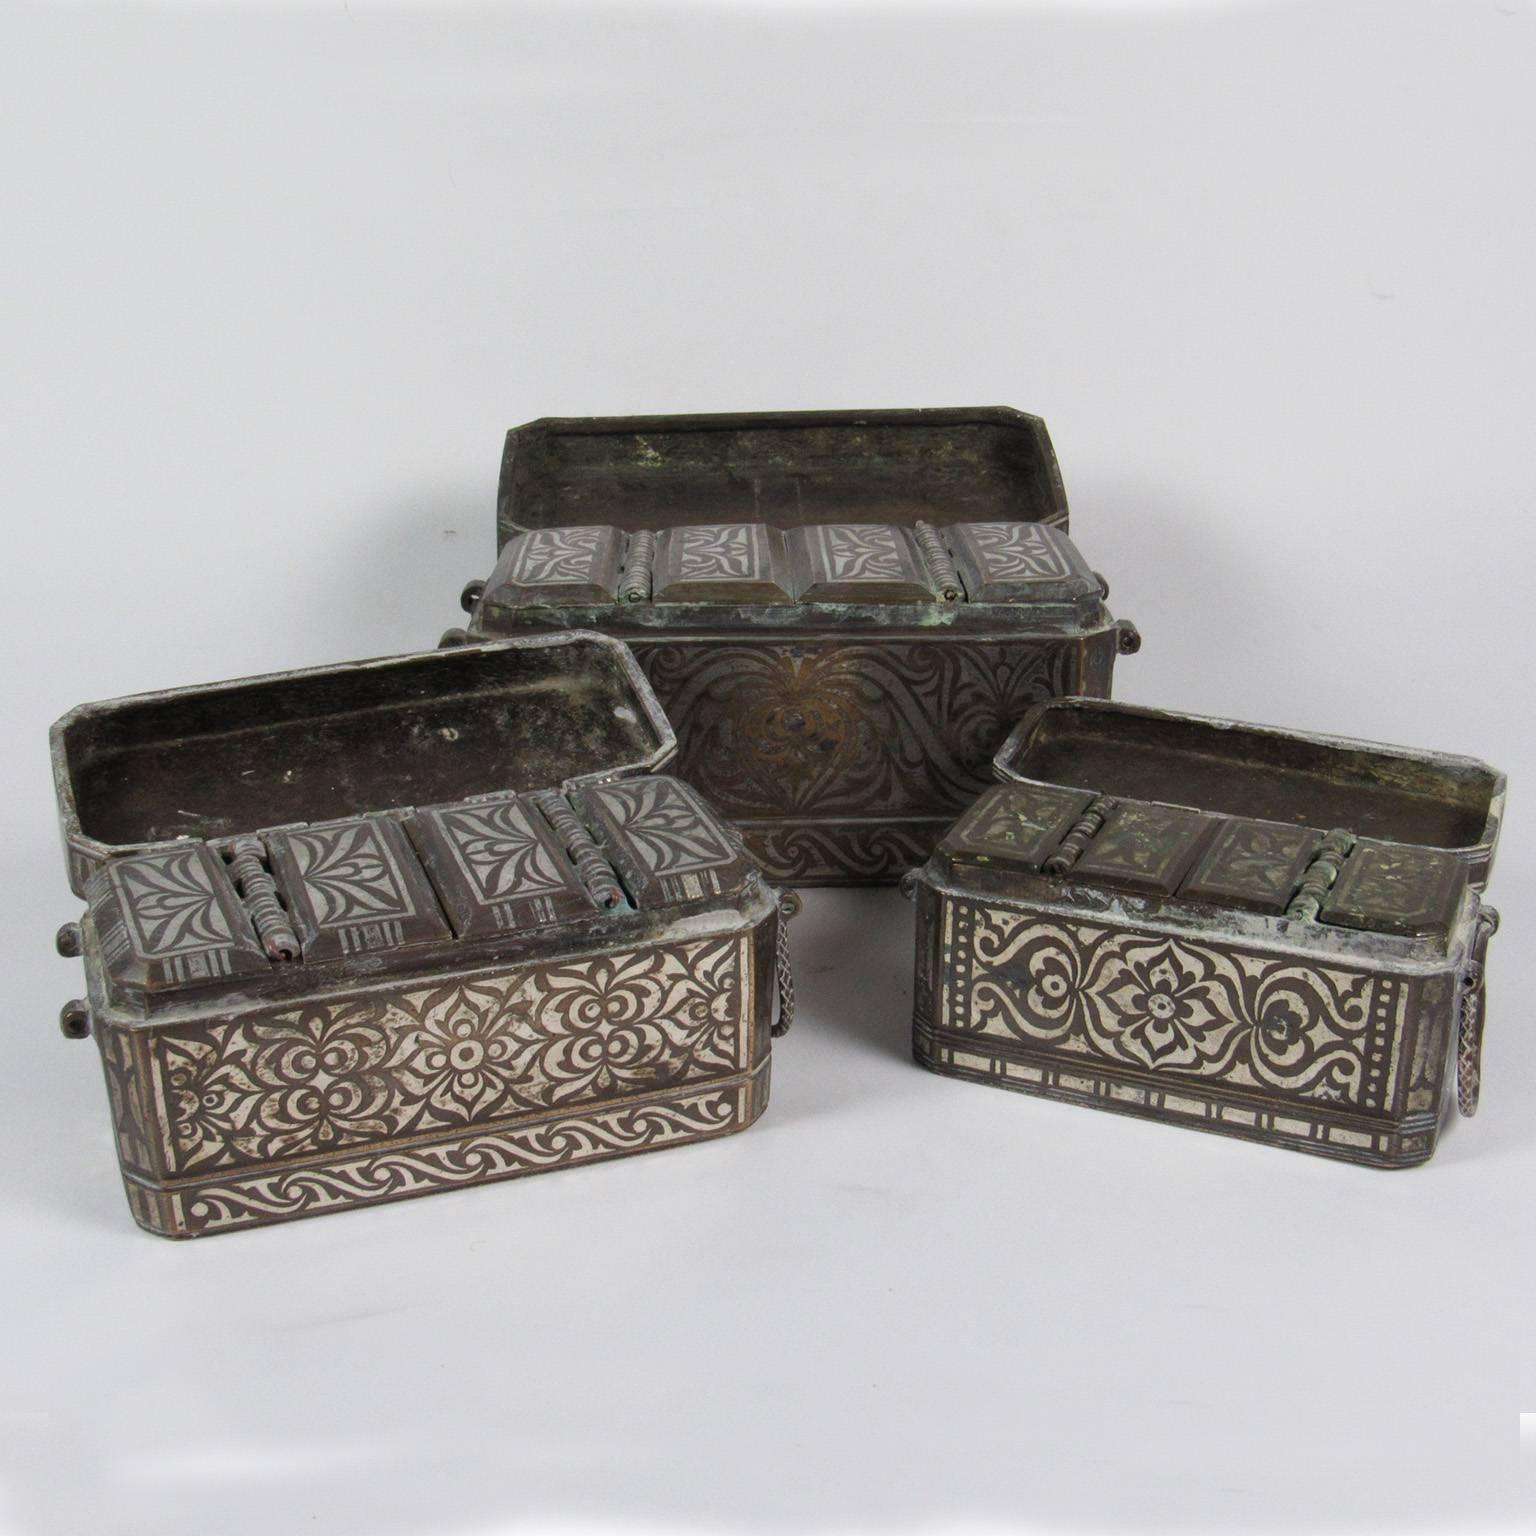 Three antique graduated silver and bronze inlaid betel nut boxes, circa 1900, Philippines. Each bronze box inlaid with silver in the Okir scroll pattern, interior of fitted with central compartment flanked by two smaller compartments for storing